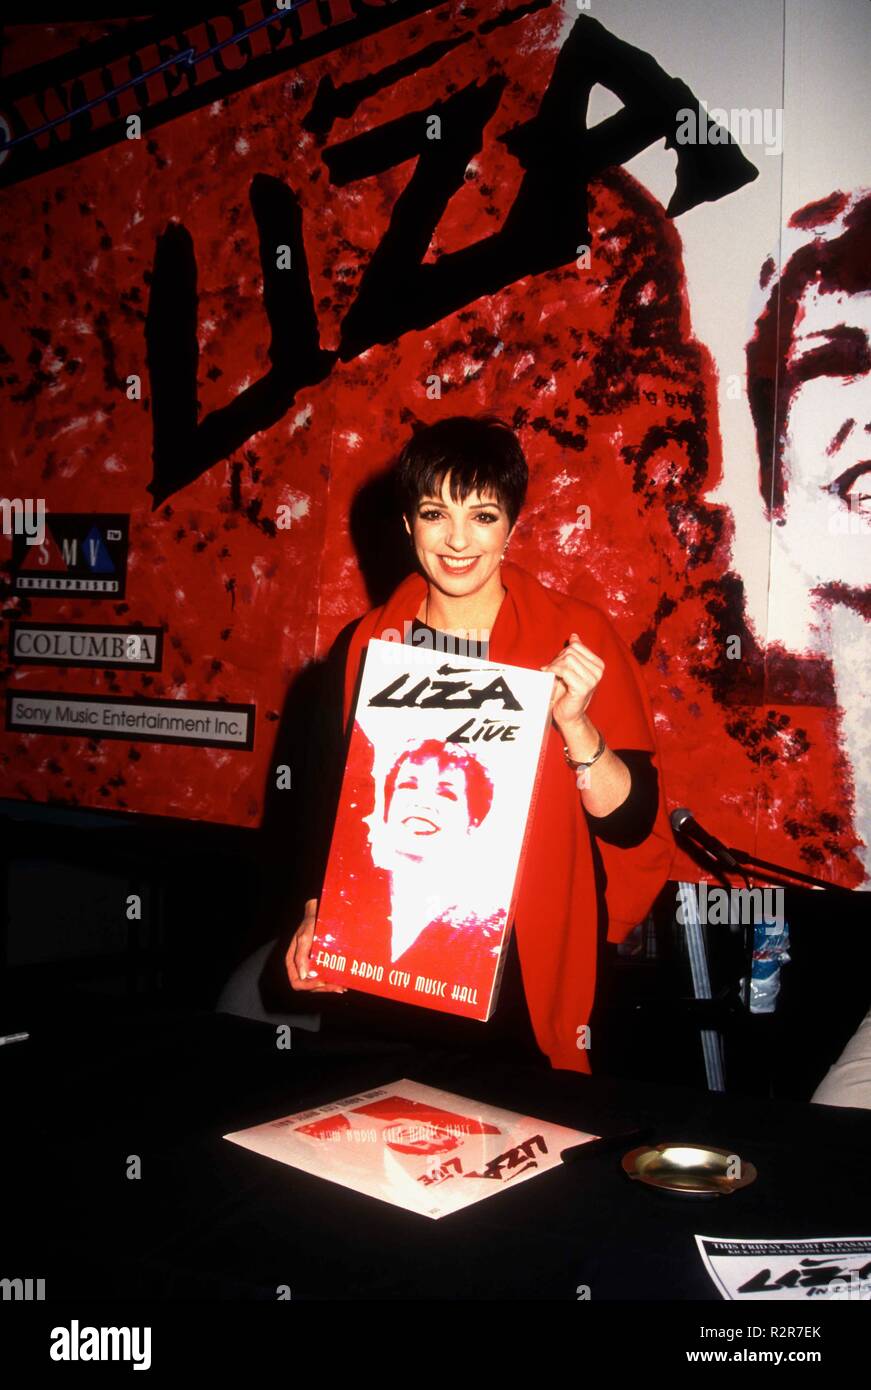 LOS ANGELES, CA - JANUARY 27: Actress/singer Liza Minelli autographs copies  of her new album and concert video 'Liza Live from Radio City Music Hall'  on January 27, 1993 at The Wherehouse